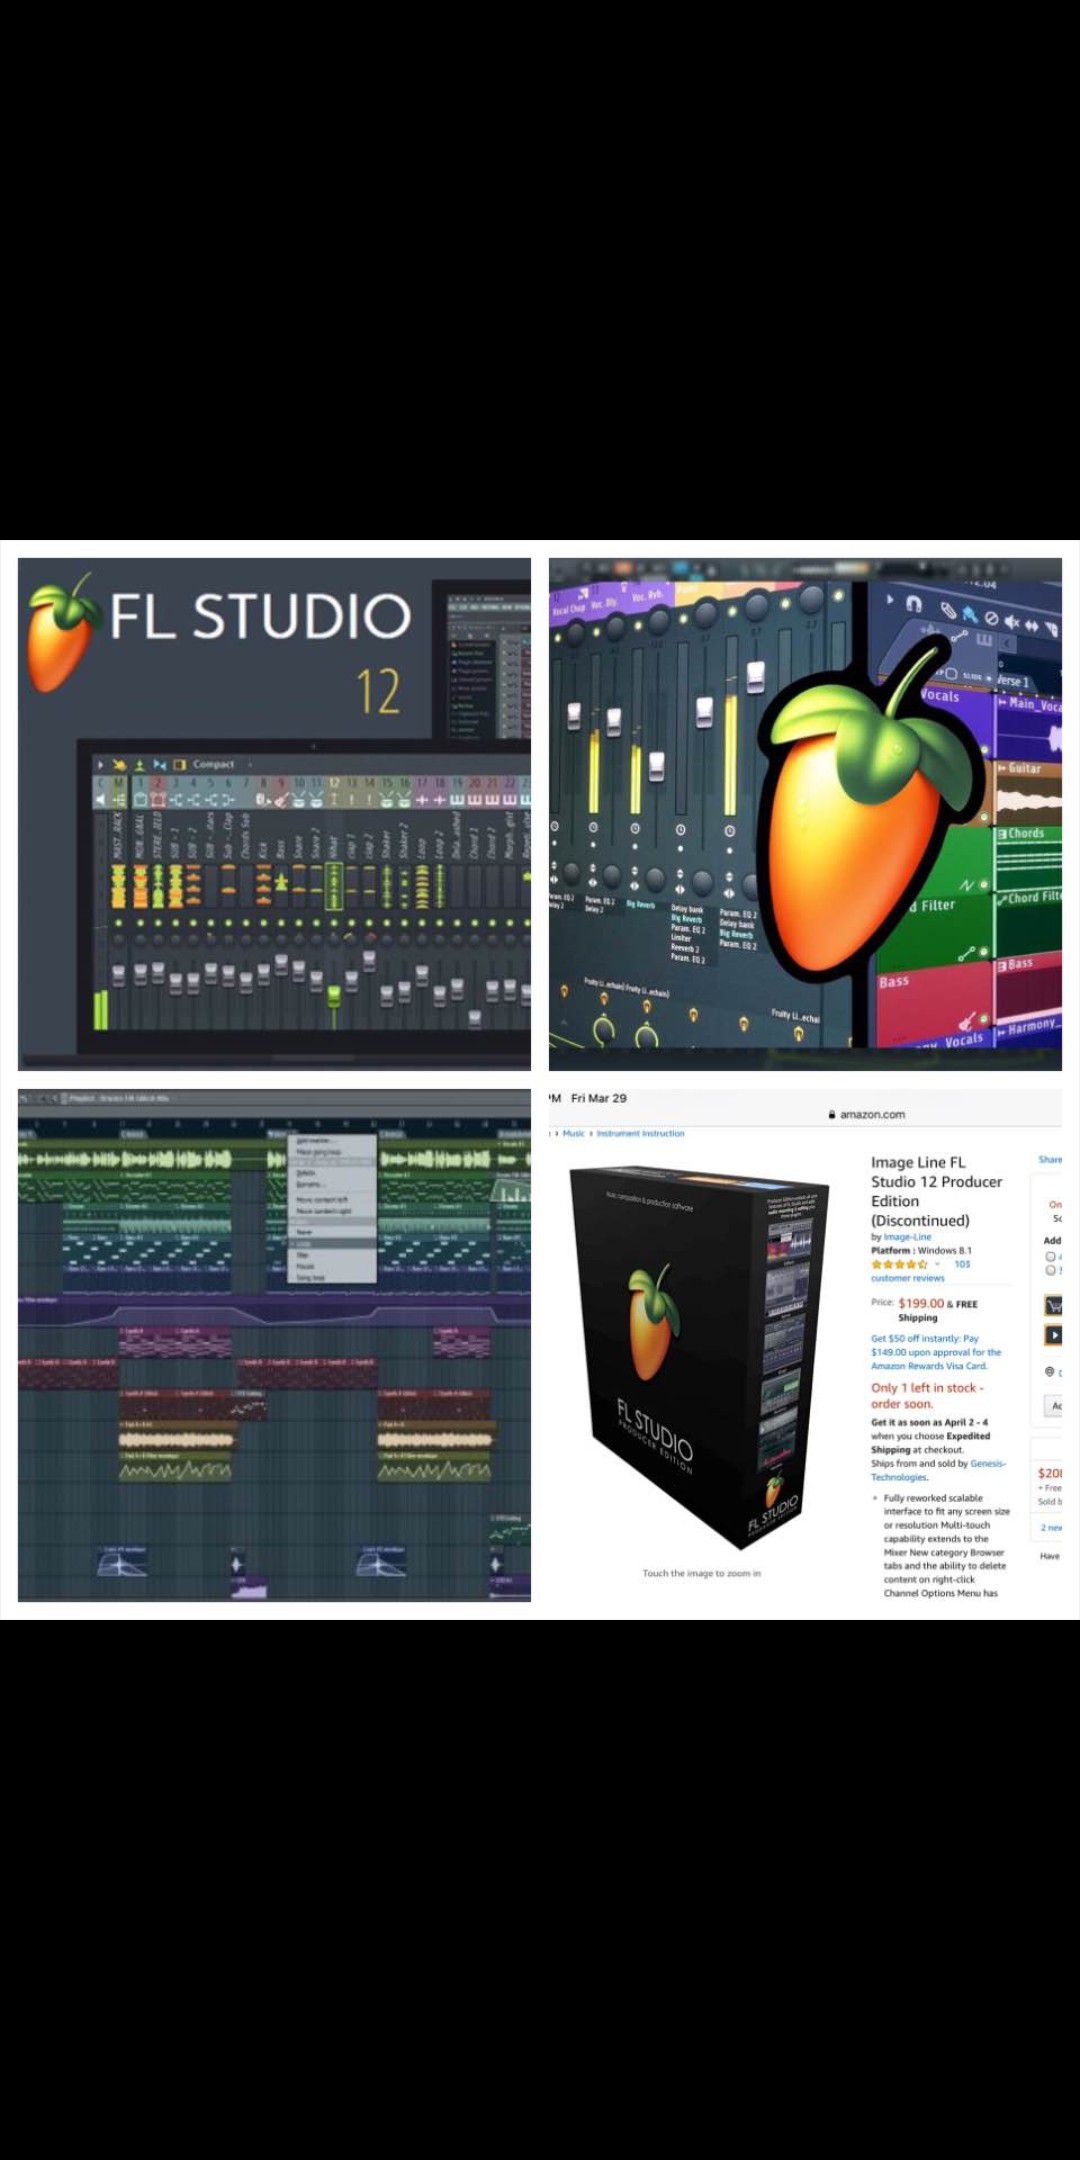 FL studio 12 fullversion I will install on Windows laptop only for $45 it's a $199 software special deal start making beats like a pro n sell them $45